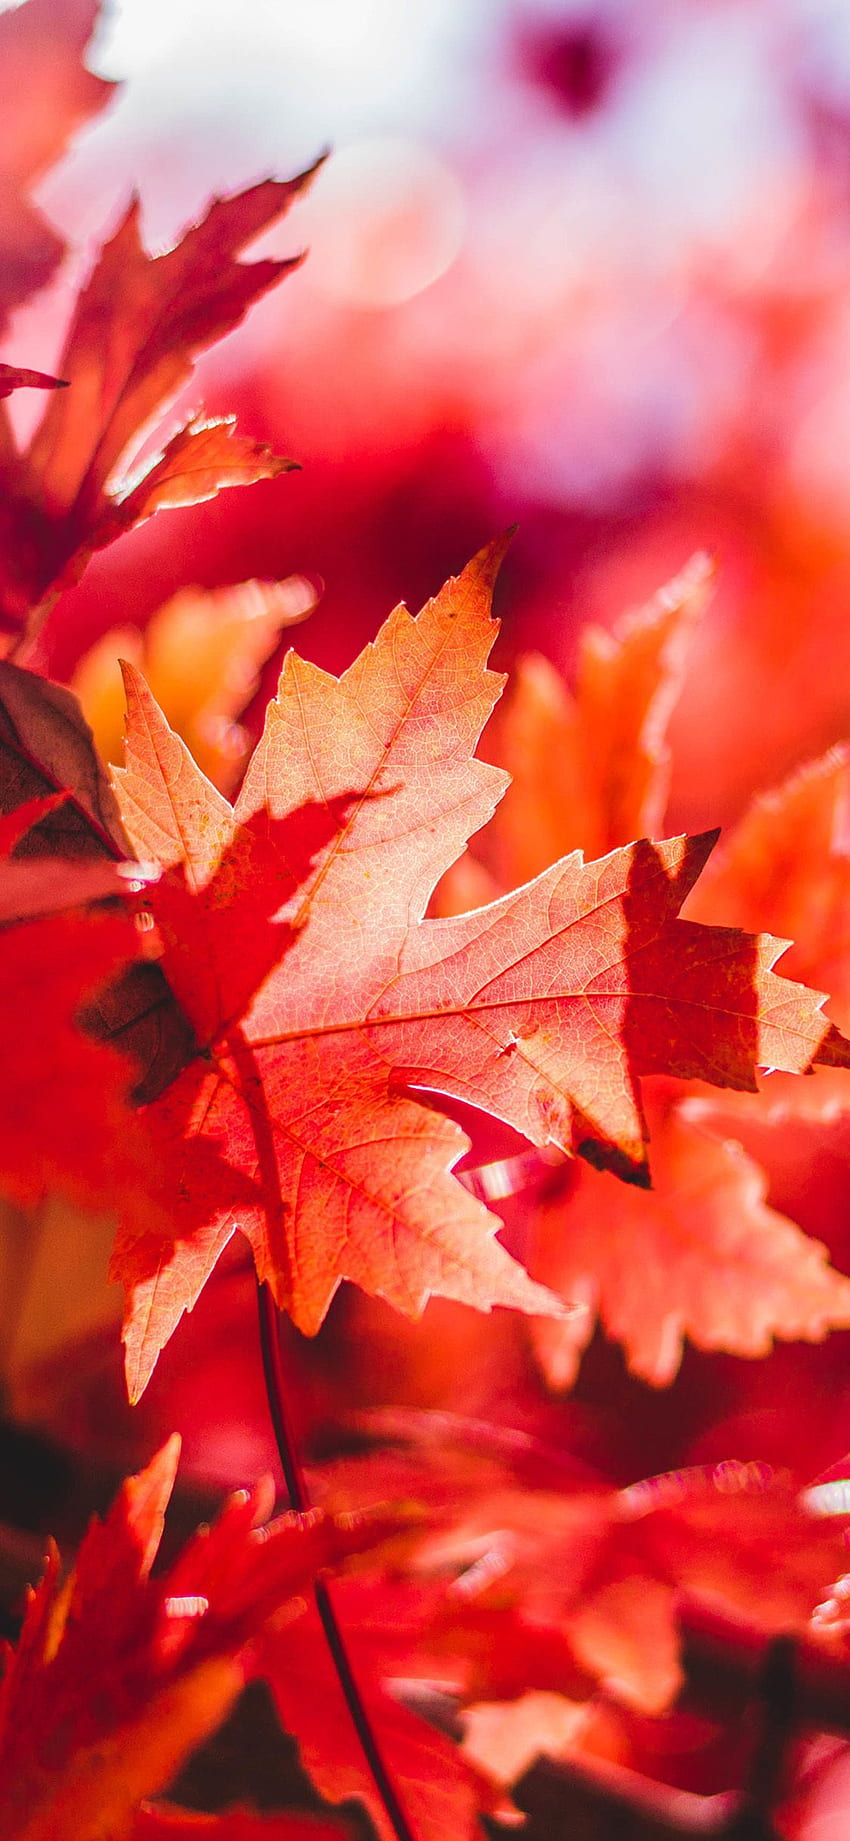 Maple Leaf Flower Red Fall Autumn Nature Via For IPhone X. Autumn Nature, Fall , Autumn graphy HD phone wallpaper